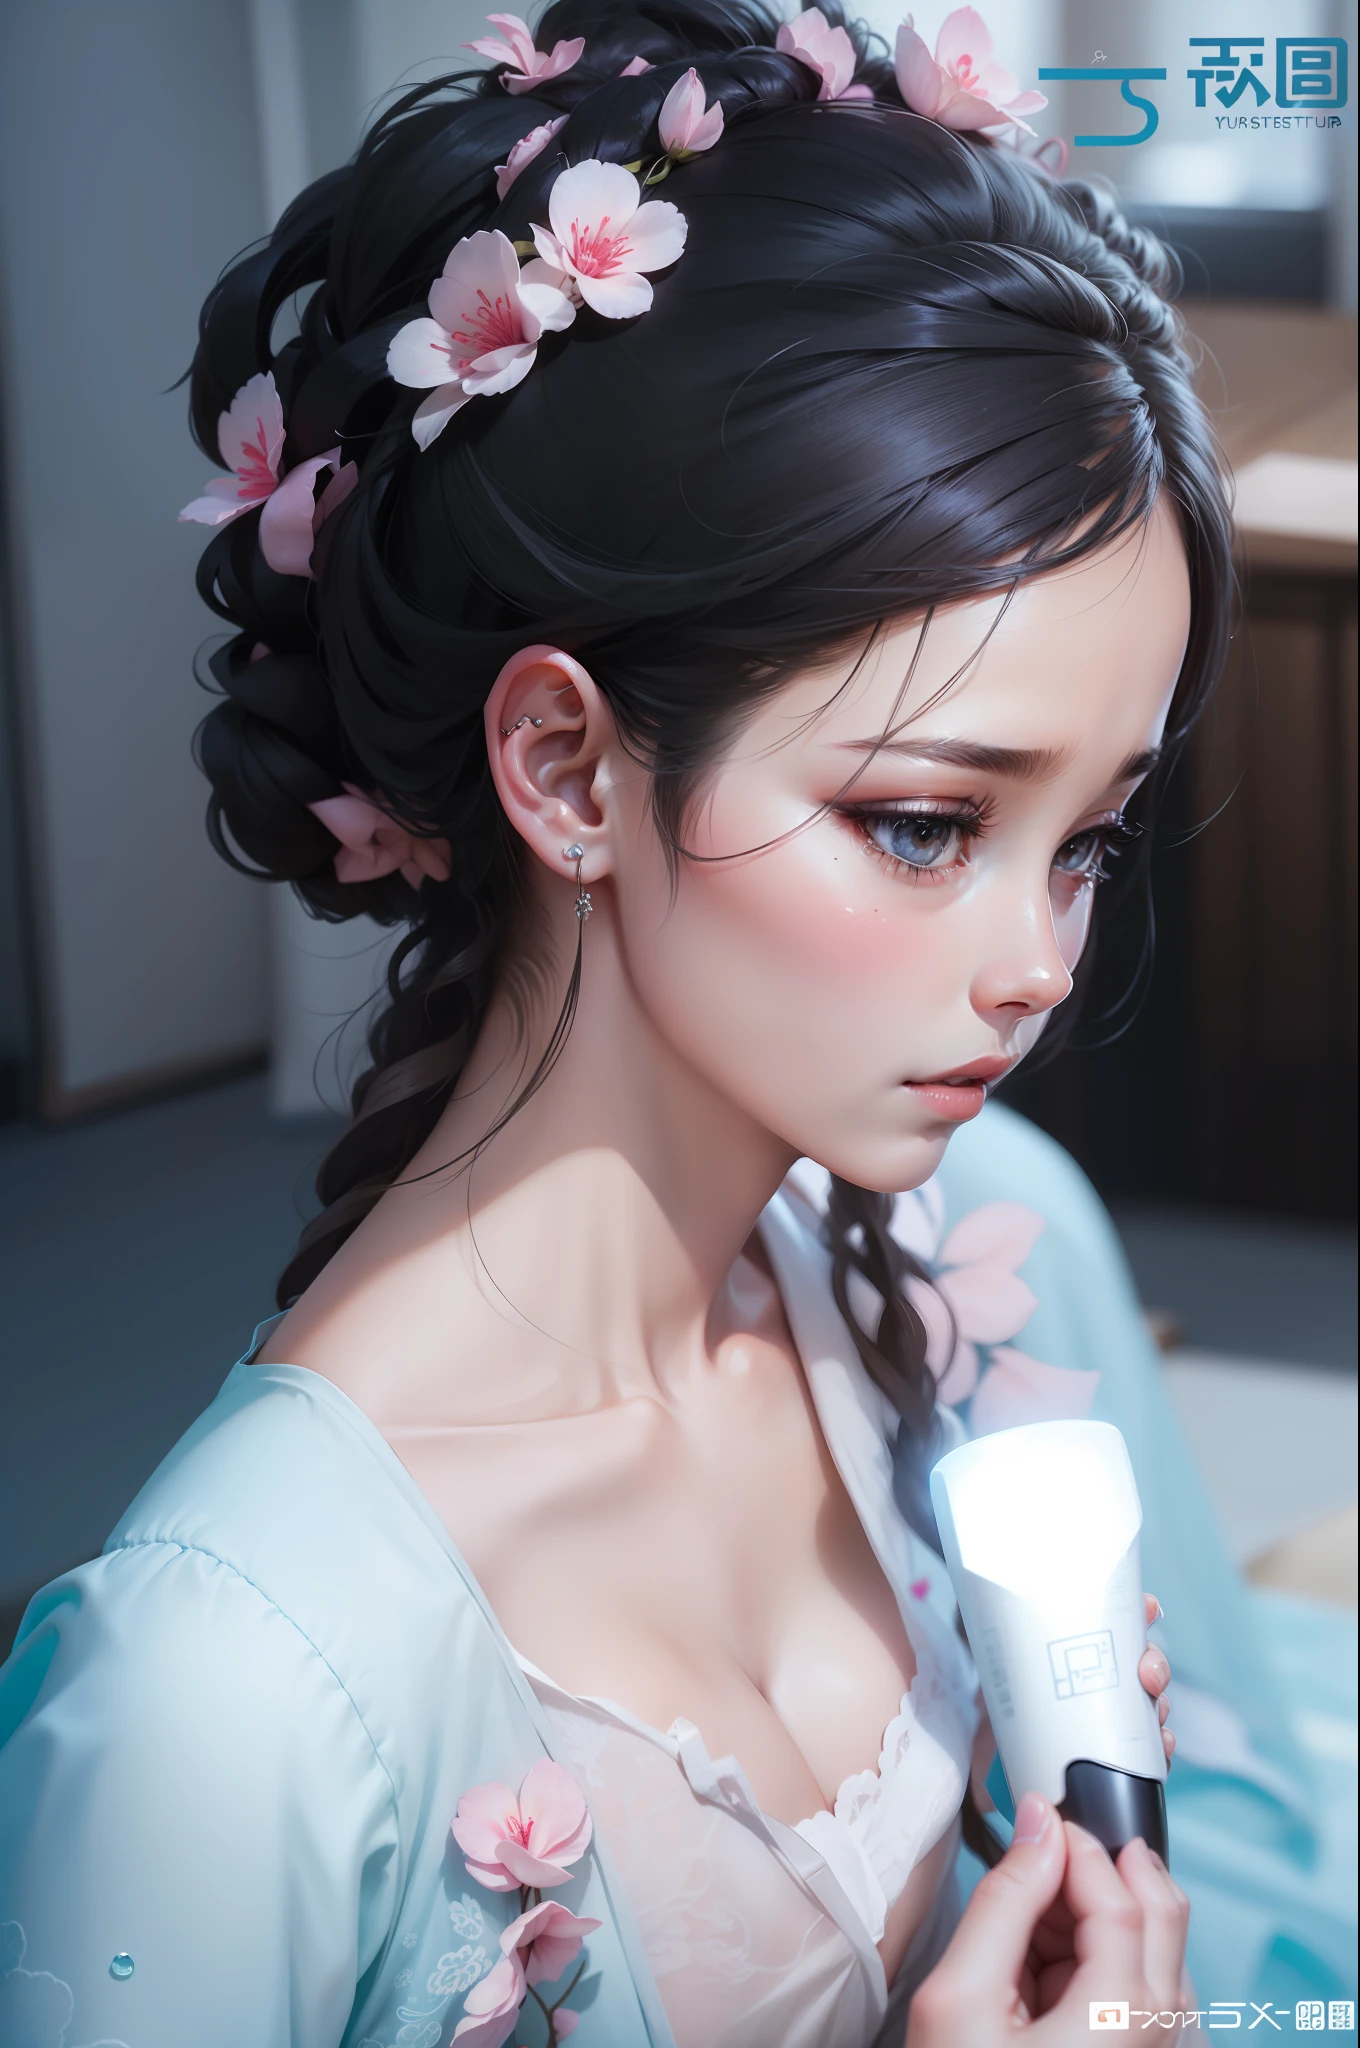 (bestquality、A masterpie:1.2)、Ultra High Res、lifelike、Front lighting、with intricate details、Exquisite details and textures、1girl、solo、(young)、Facial Highlights、fulllllbody、Detailed face、Teardrop mole、White Skin、Silver hair、ponytails、Braid hair、Watch your audience、s big eyes、Silk robes、(Hollow pattern、WHITE、silk)、ear ring、tiny breasts、Slim body、Luxurious room、professional Lighting、Photon mapping、 Radiosity、physically based rendering、(((pull up skirt、White lace panties visible))